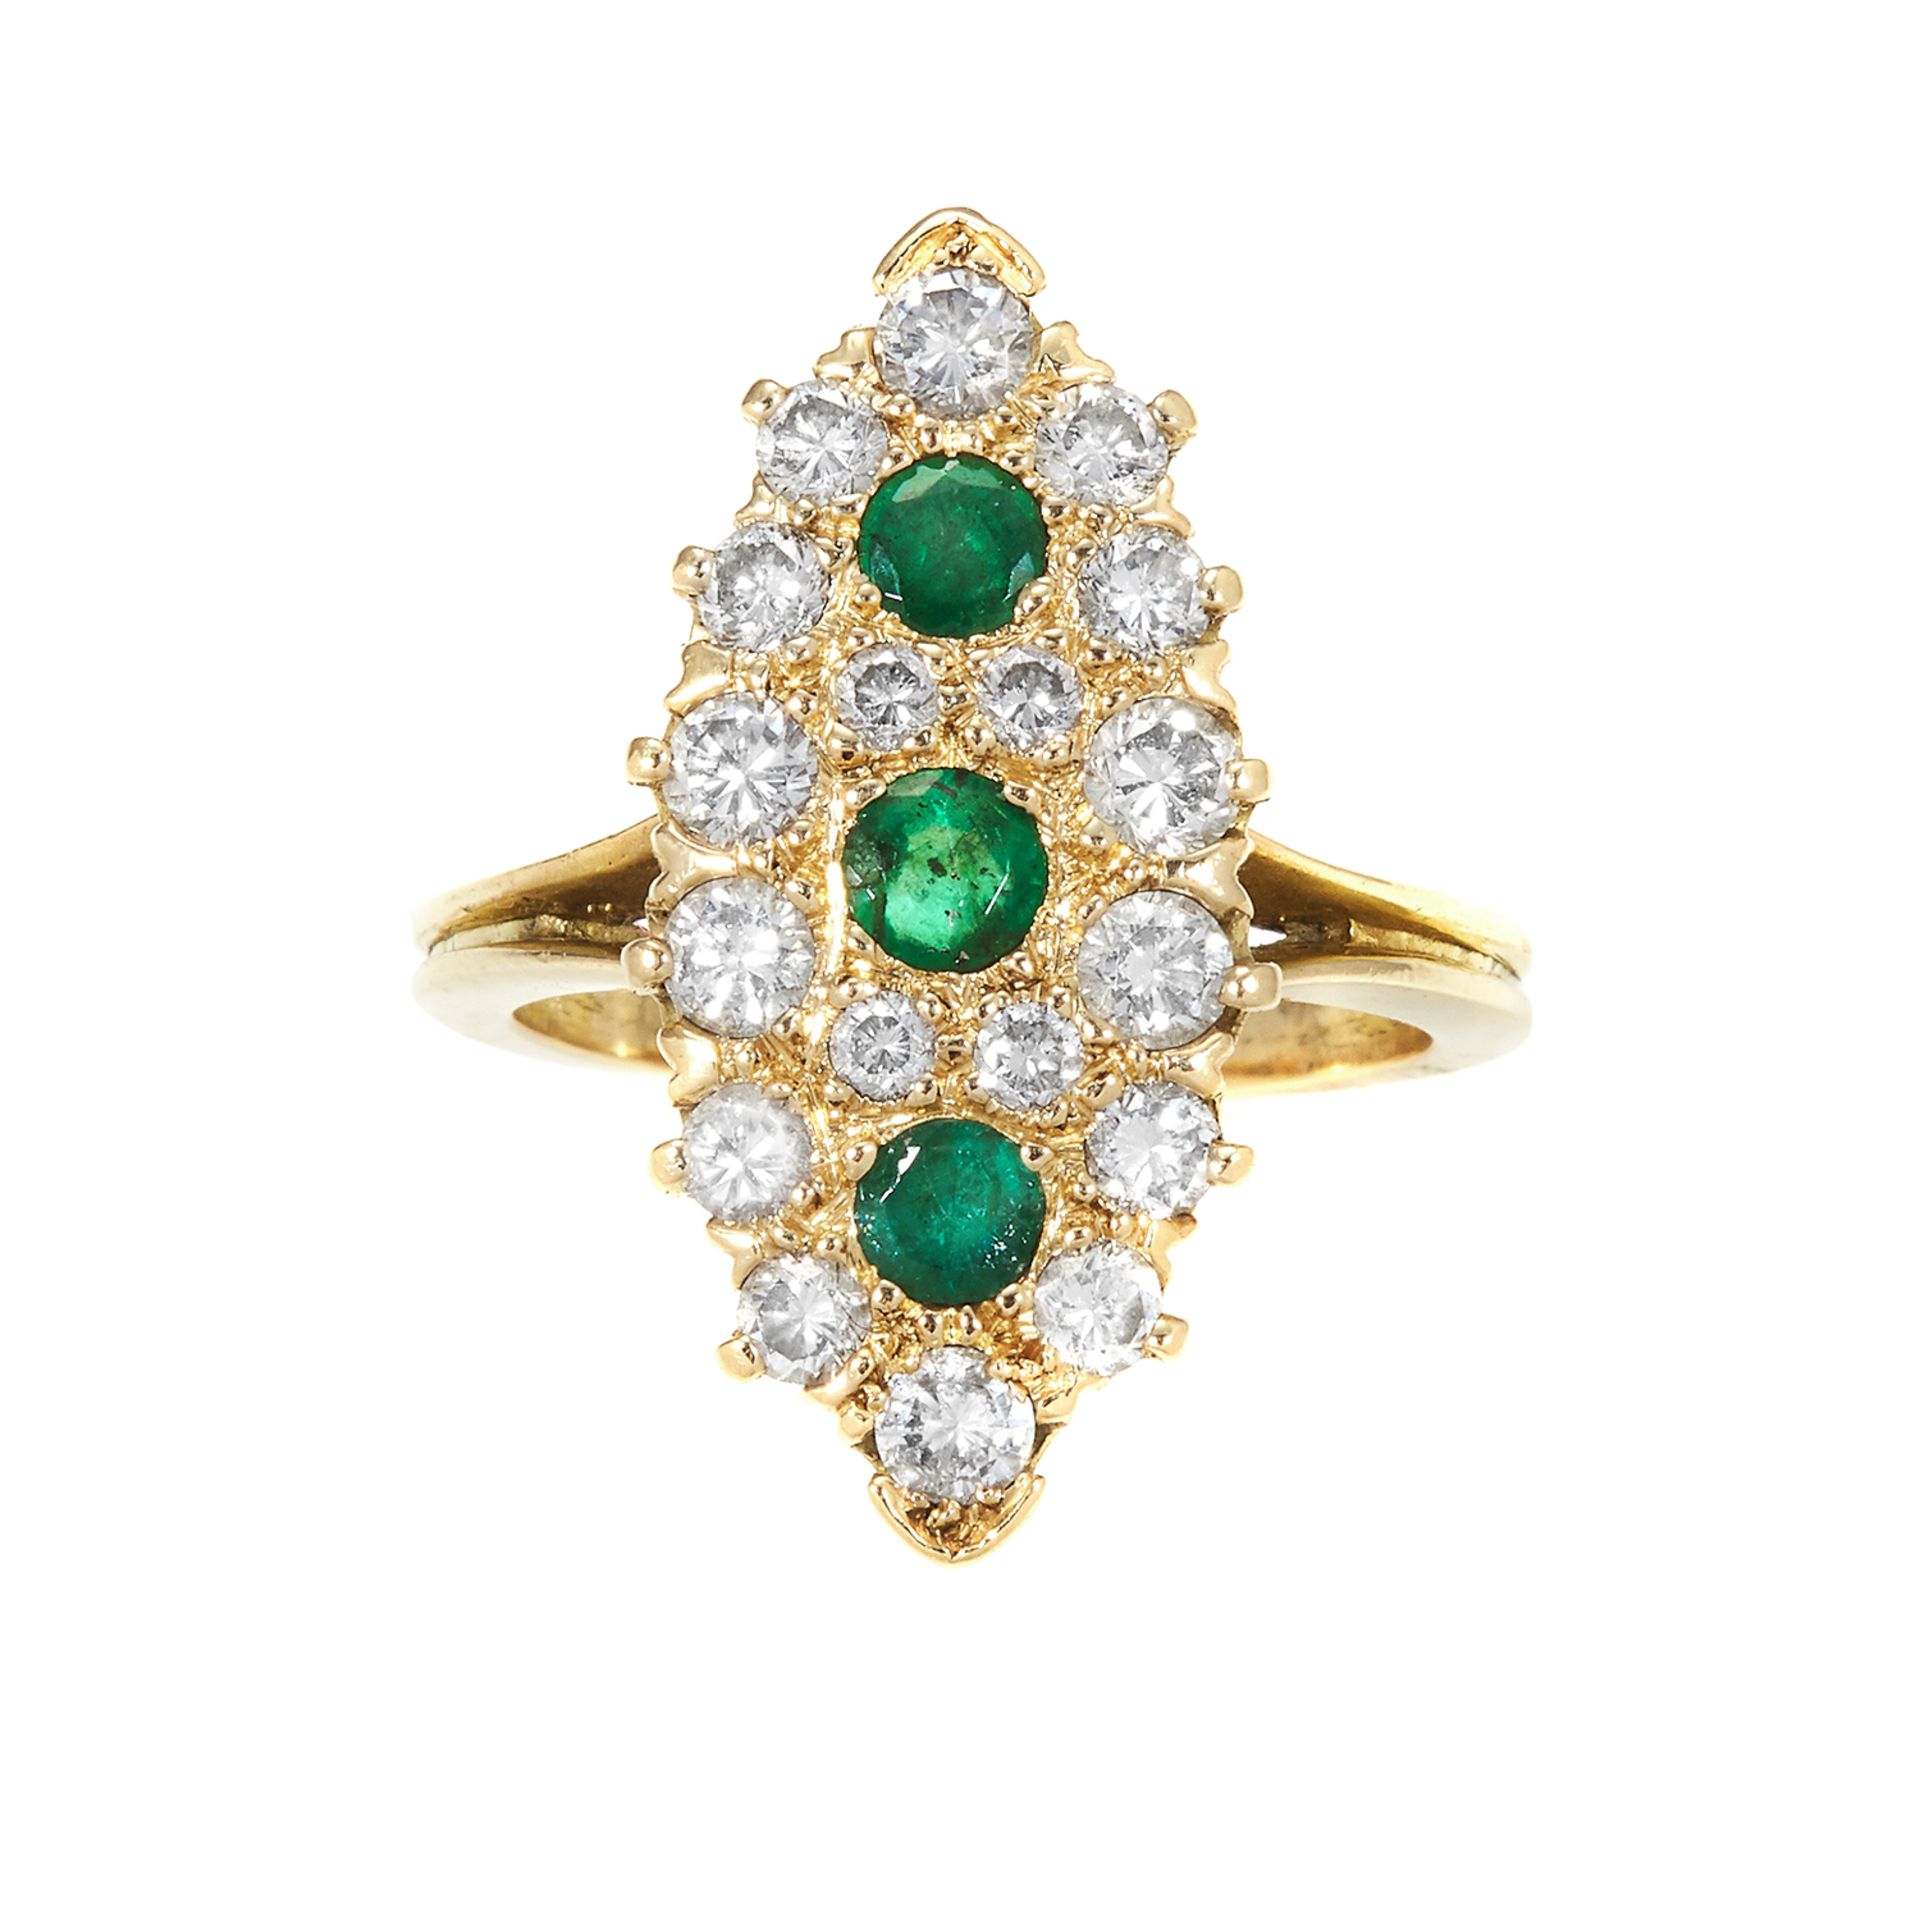 AN EMERALD AND DIAMOND COCKTAIL RING in high carat yellow gold, the marquise shaped face set with